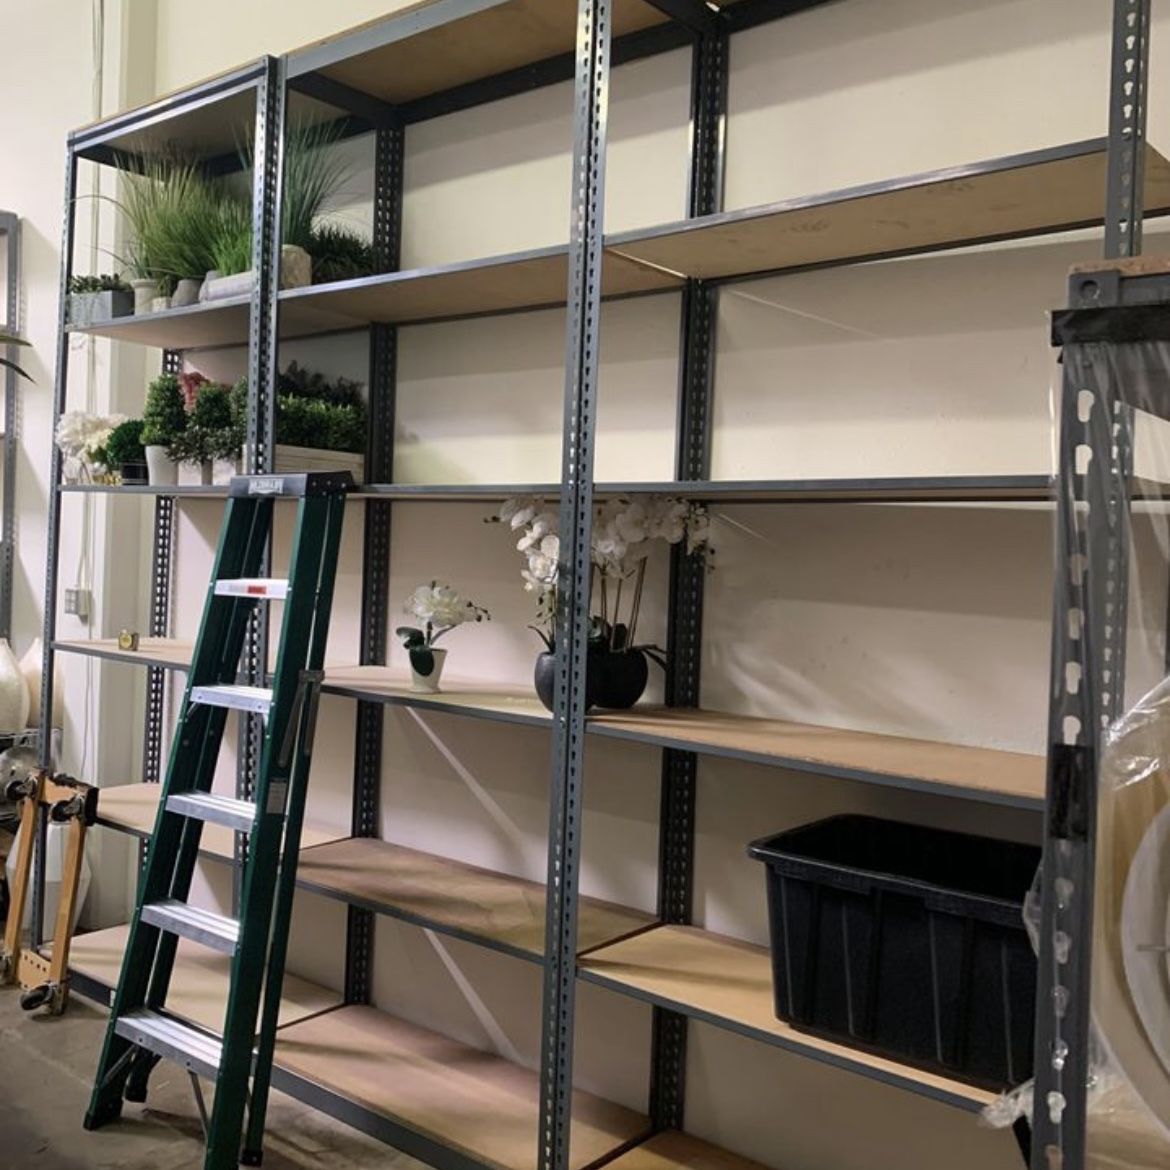 Shelving 48 in W x 18 in D Industrial Boltless Warehouse Storage Racks Stronger Than Homedepot Lowes And Costco Delivery Available